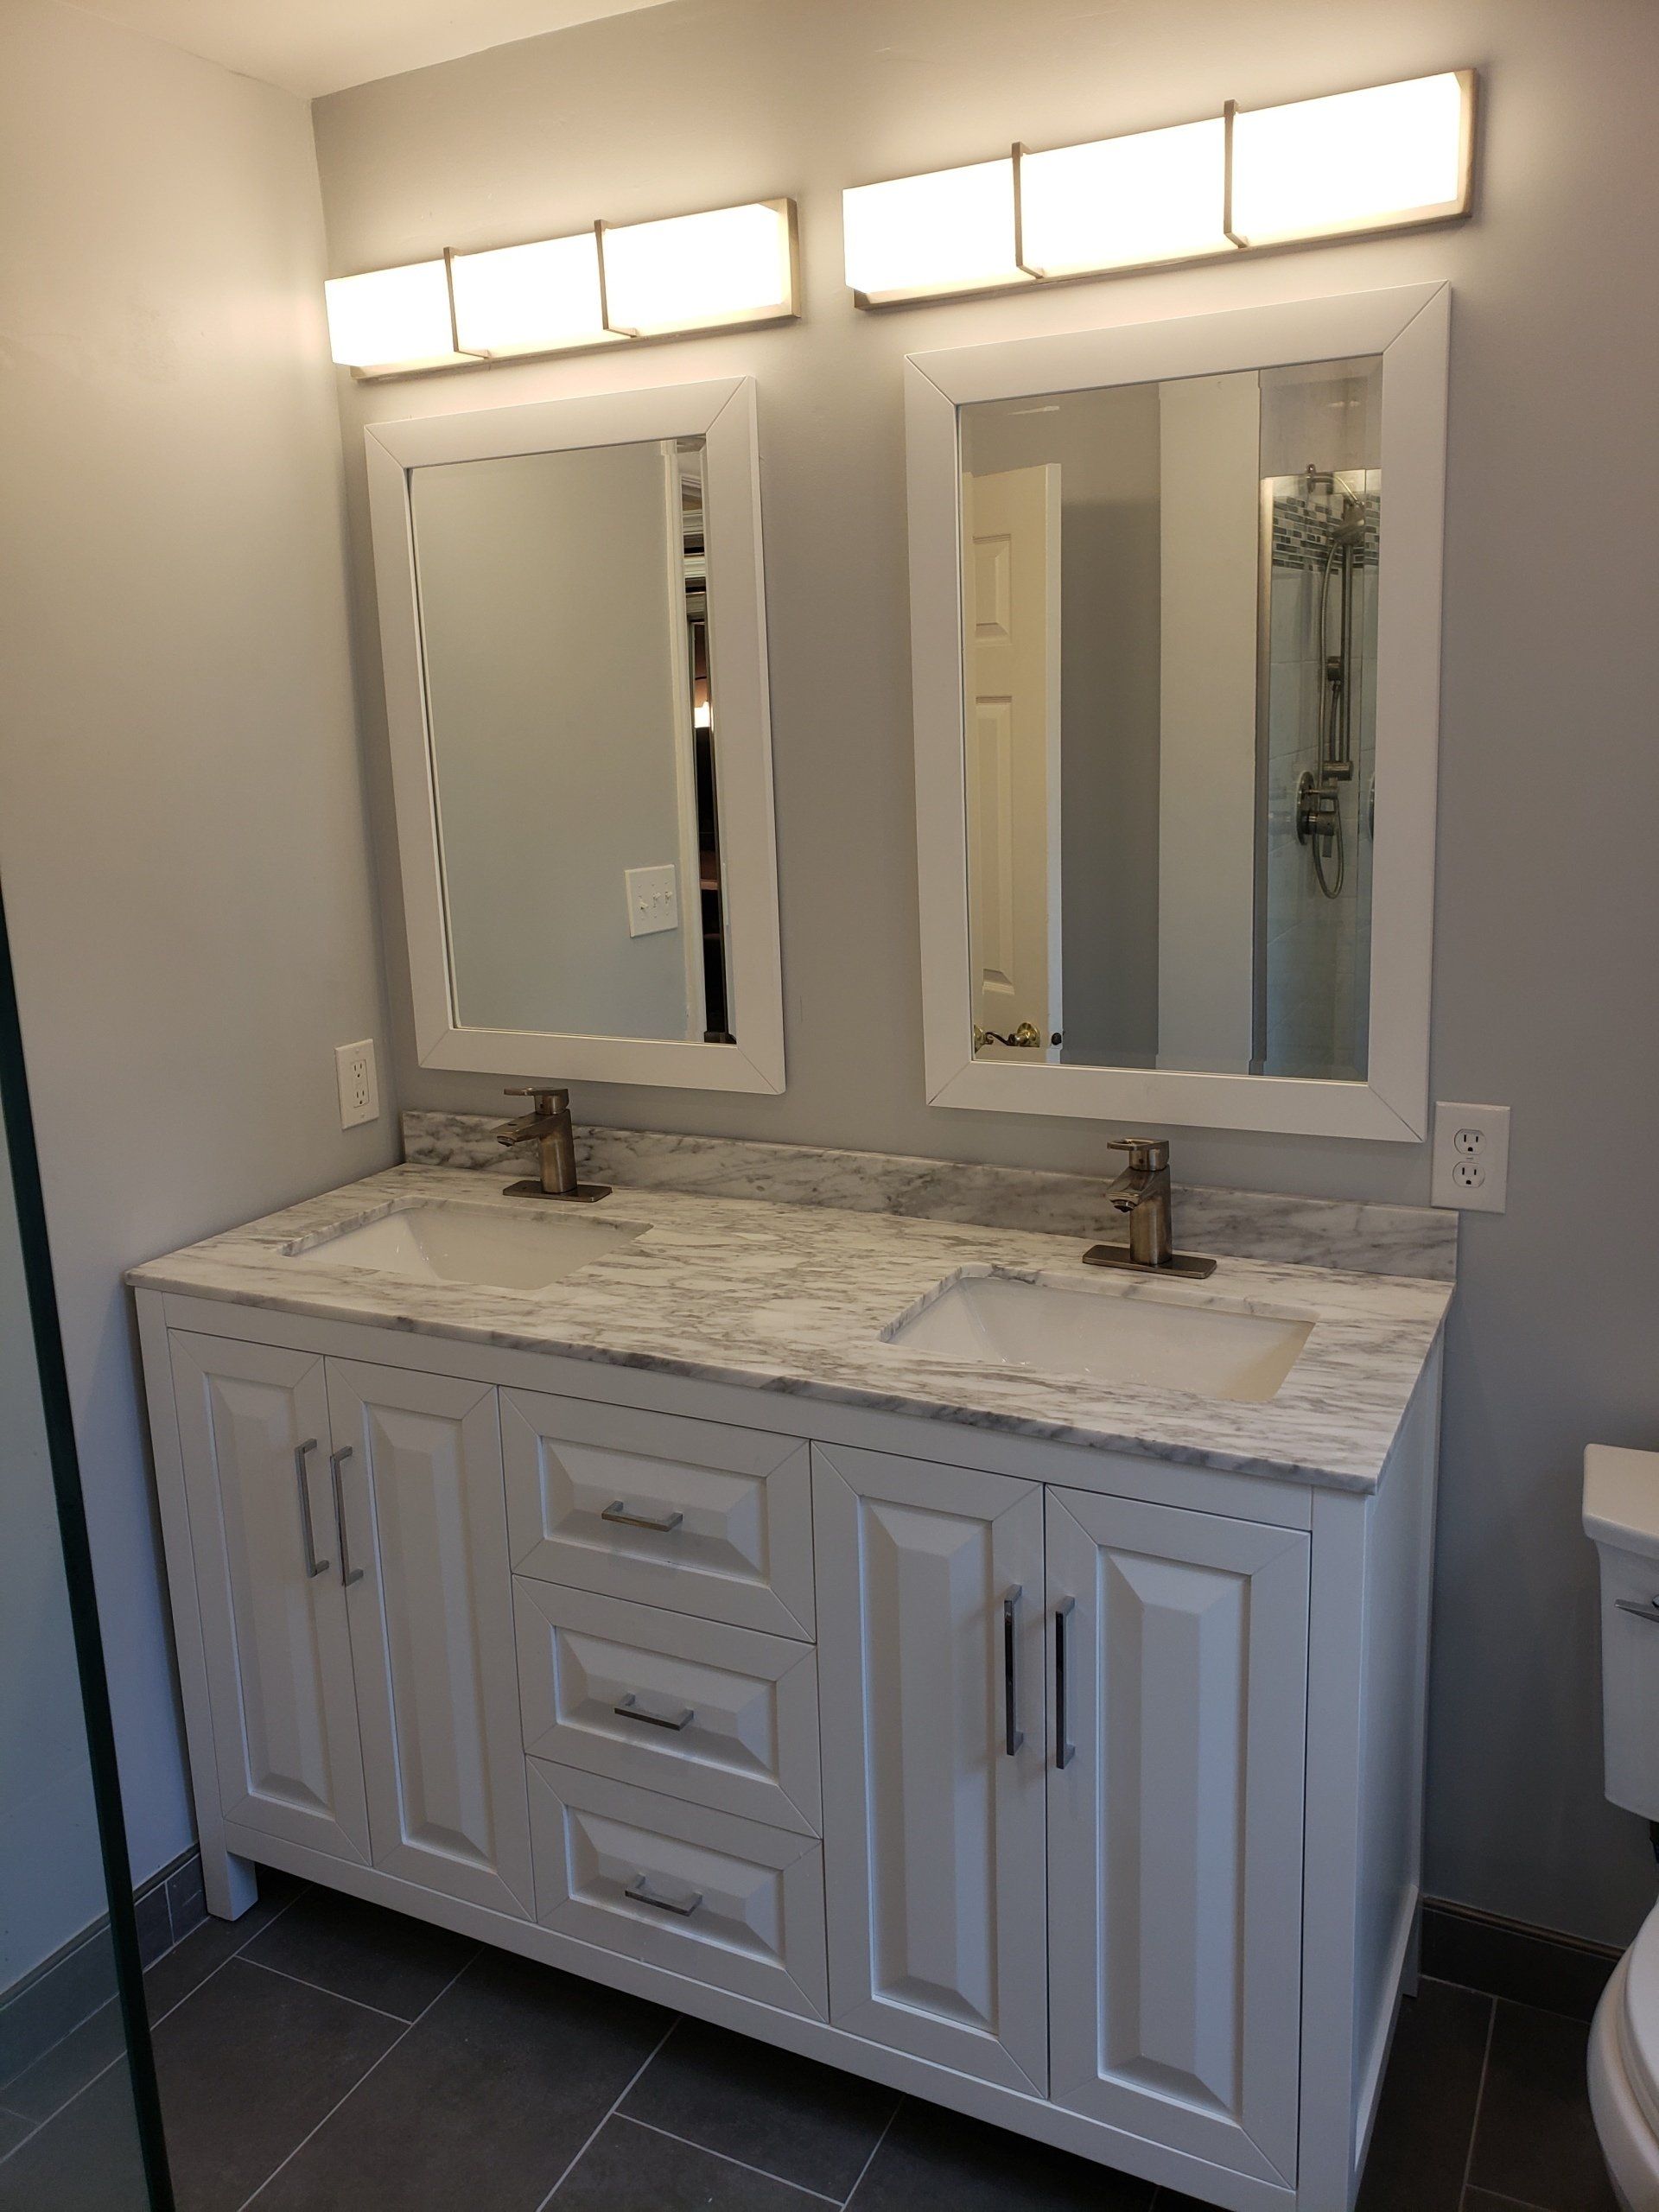 Double sink and double mirror vanity with modern design and marble top in elkins park bathroom remodel